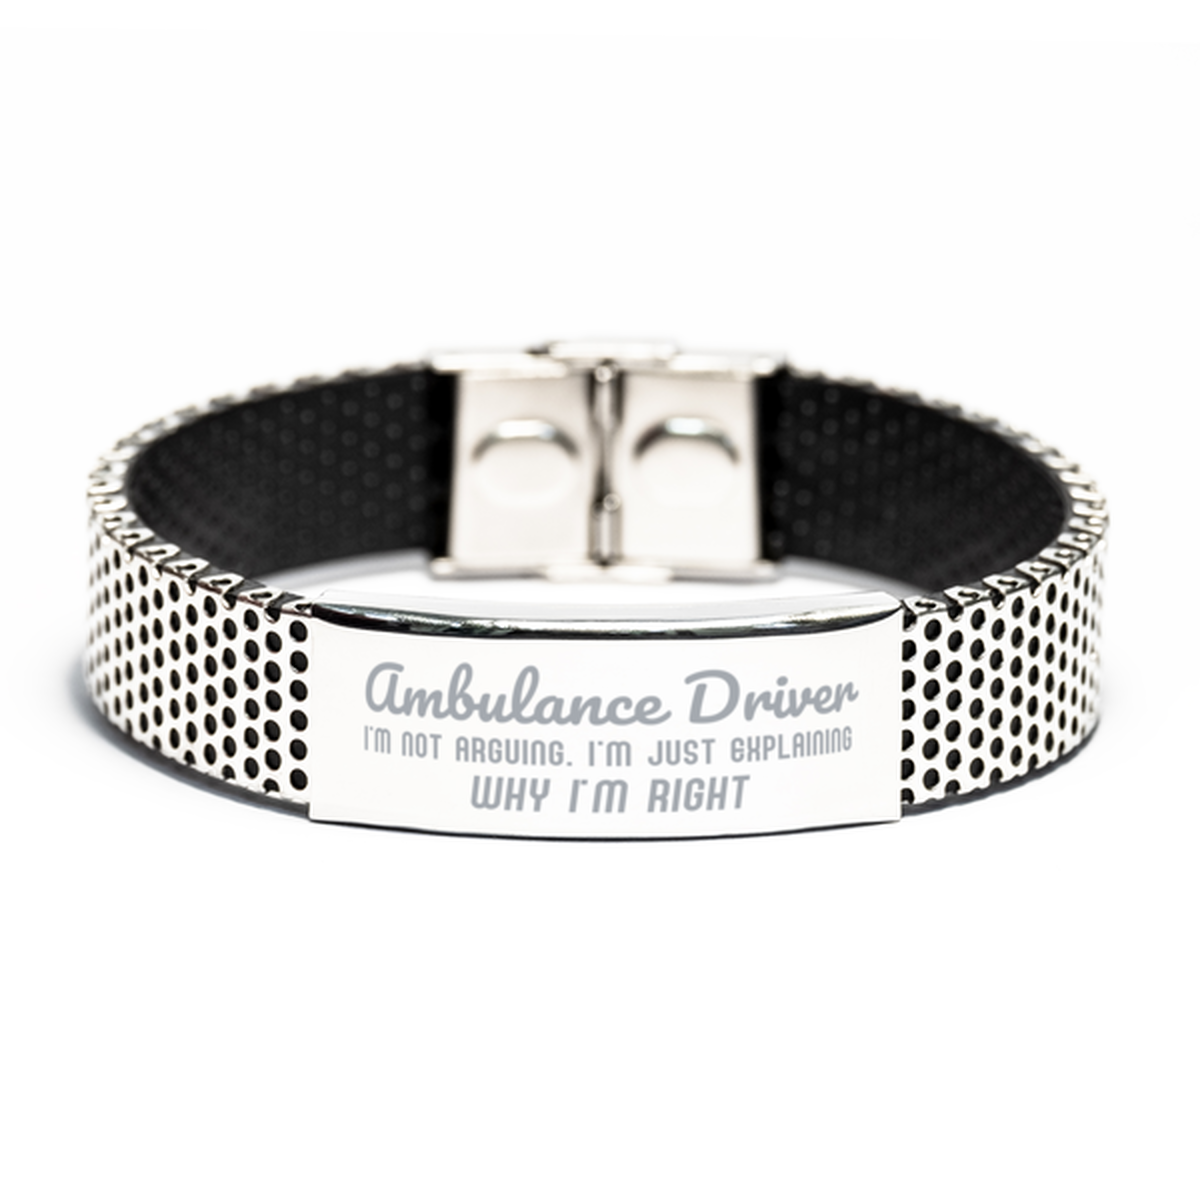 Ambulance Driver I'm not Arguing. I'm Just Explaining Why I'm RIGHT Stainless Steel Bracelet, Funny Saying Quote Ambulance Driver Gifts For Ambulance Driver Graduation Birthday Christmas Gifts for Men Women Coworker